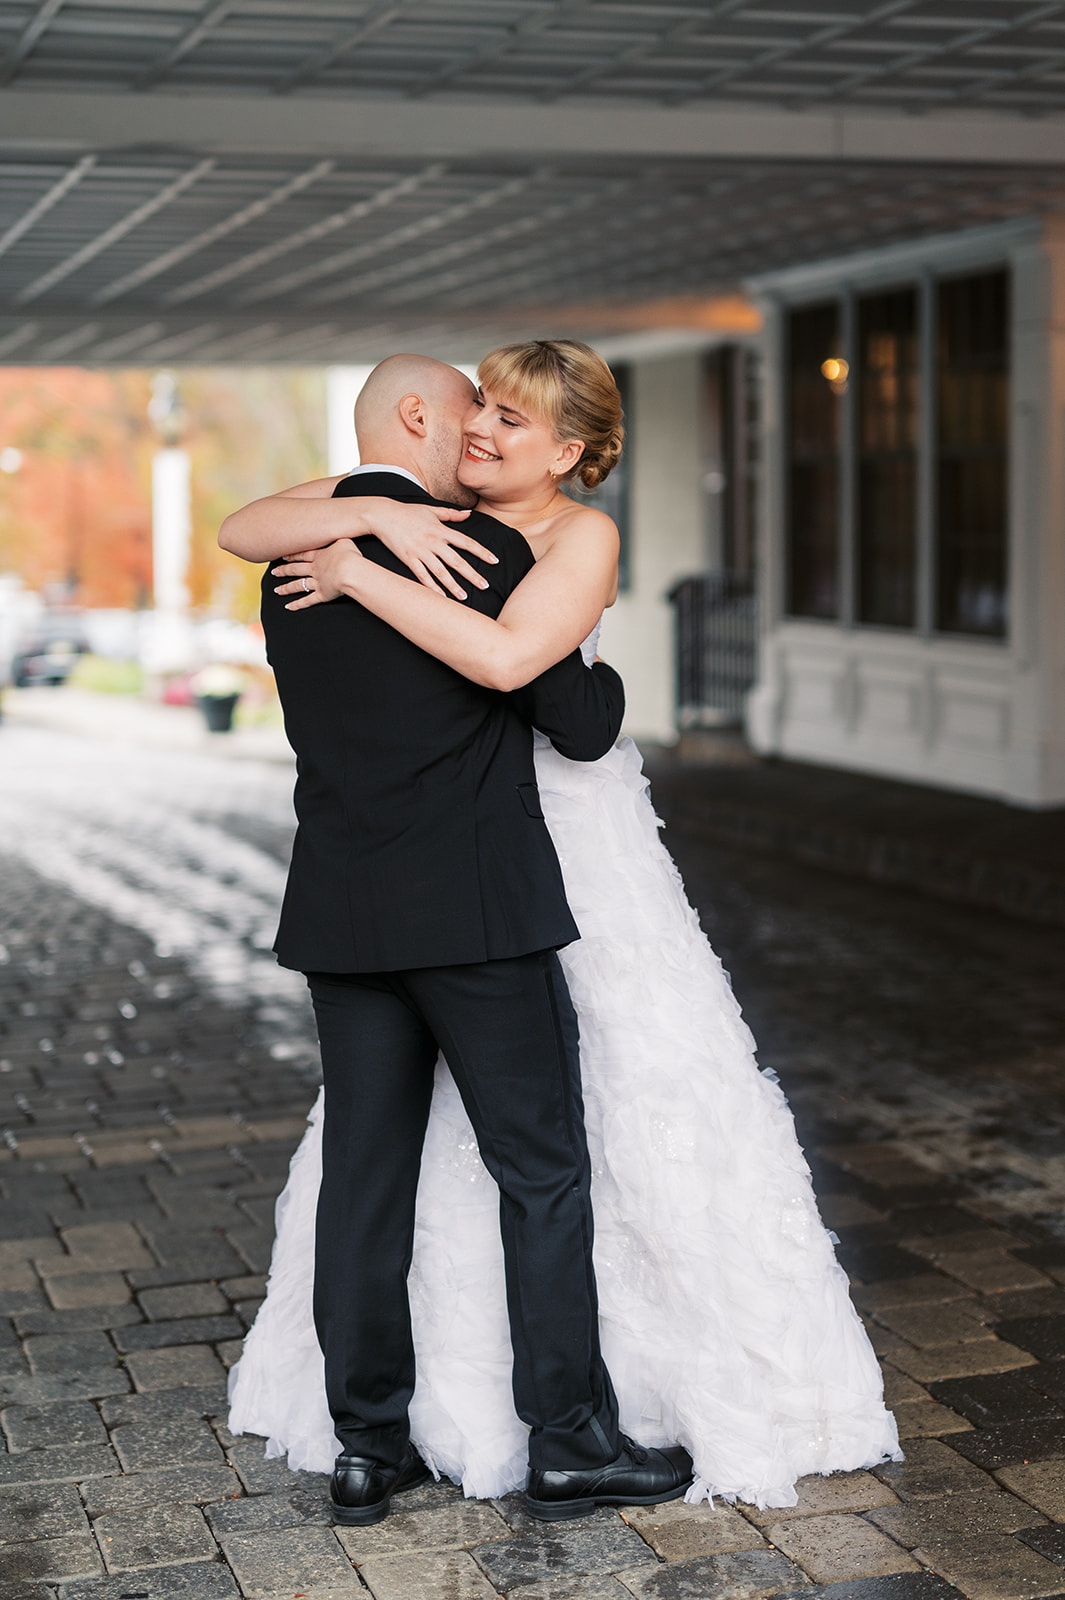 Newlyweds hug and smile while under drop off covering for their wedding